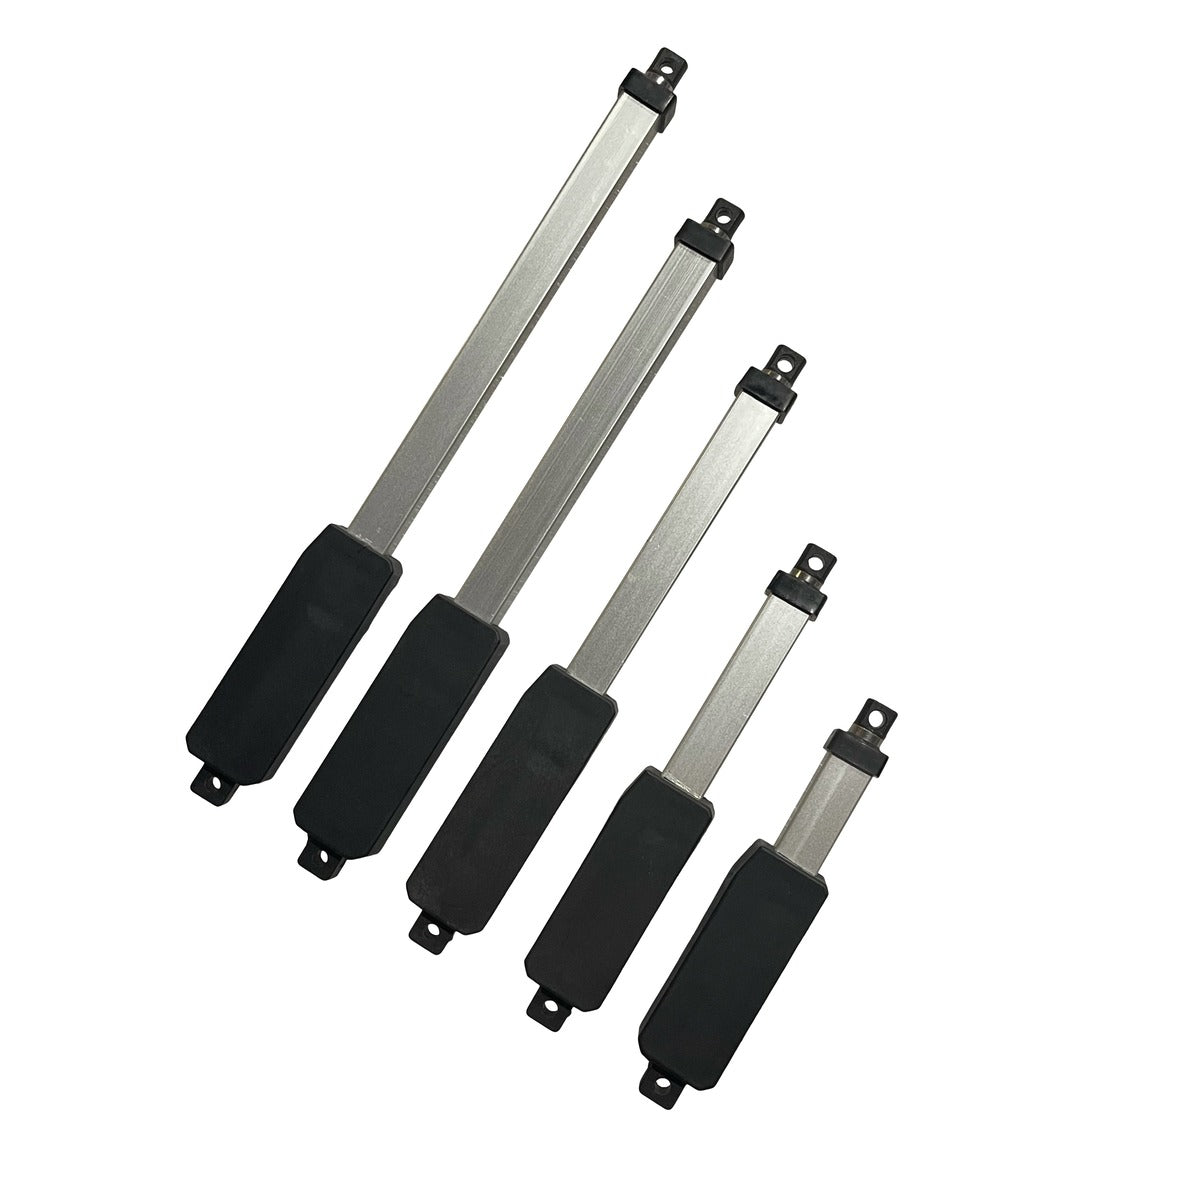 F12 Micro Linear Actuators Product Image